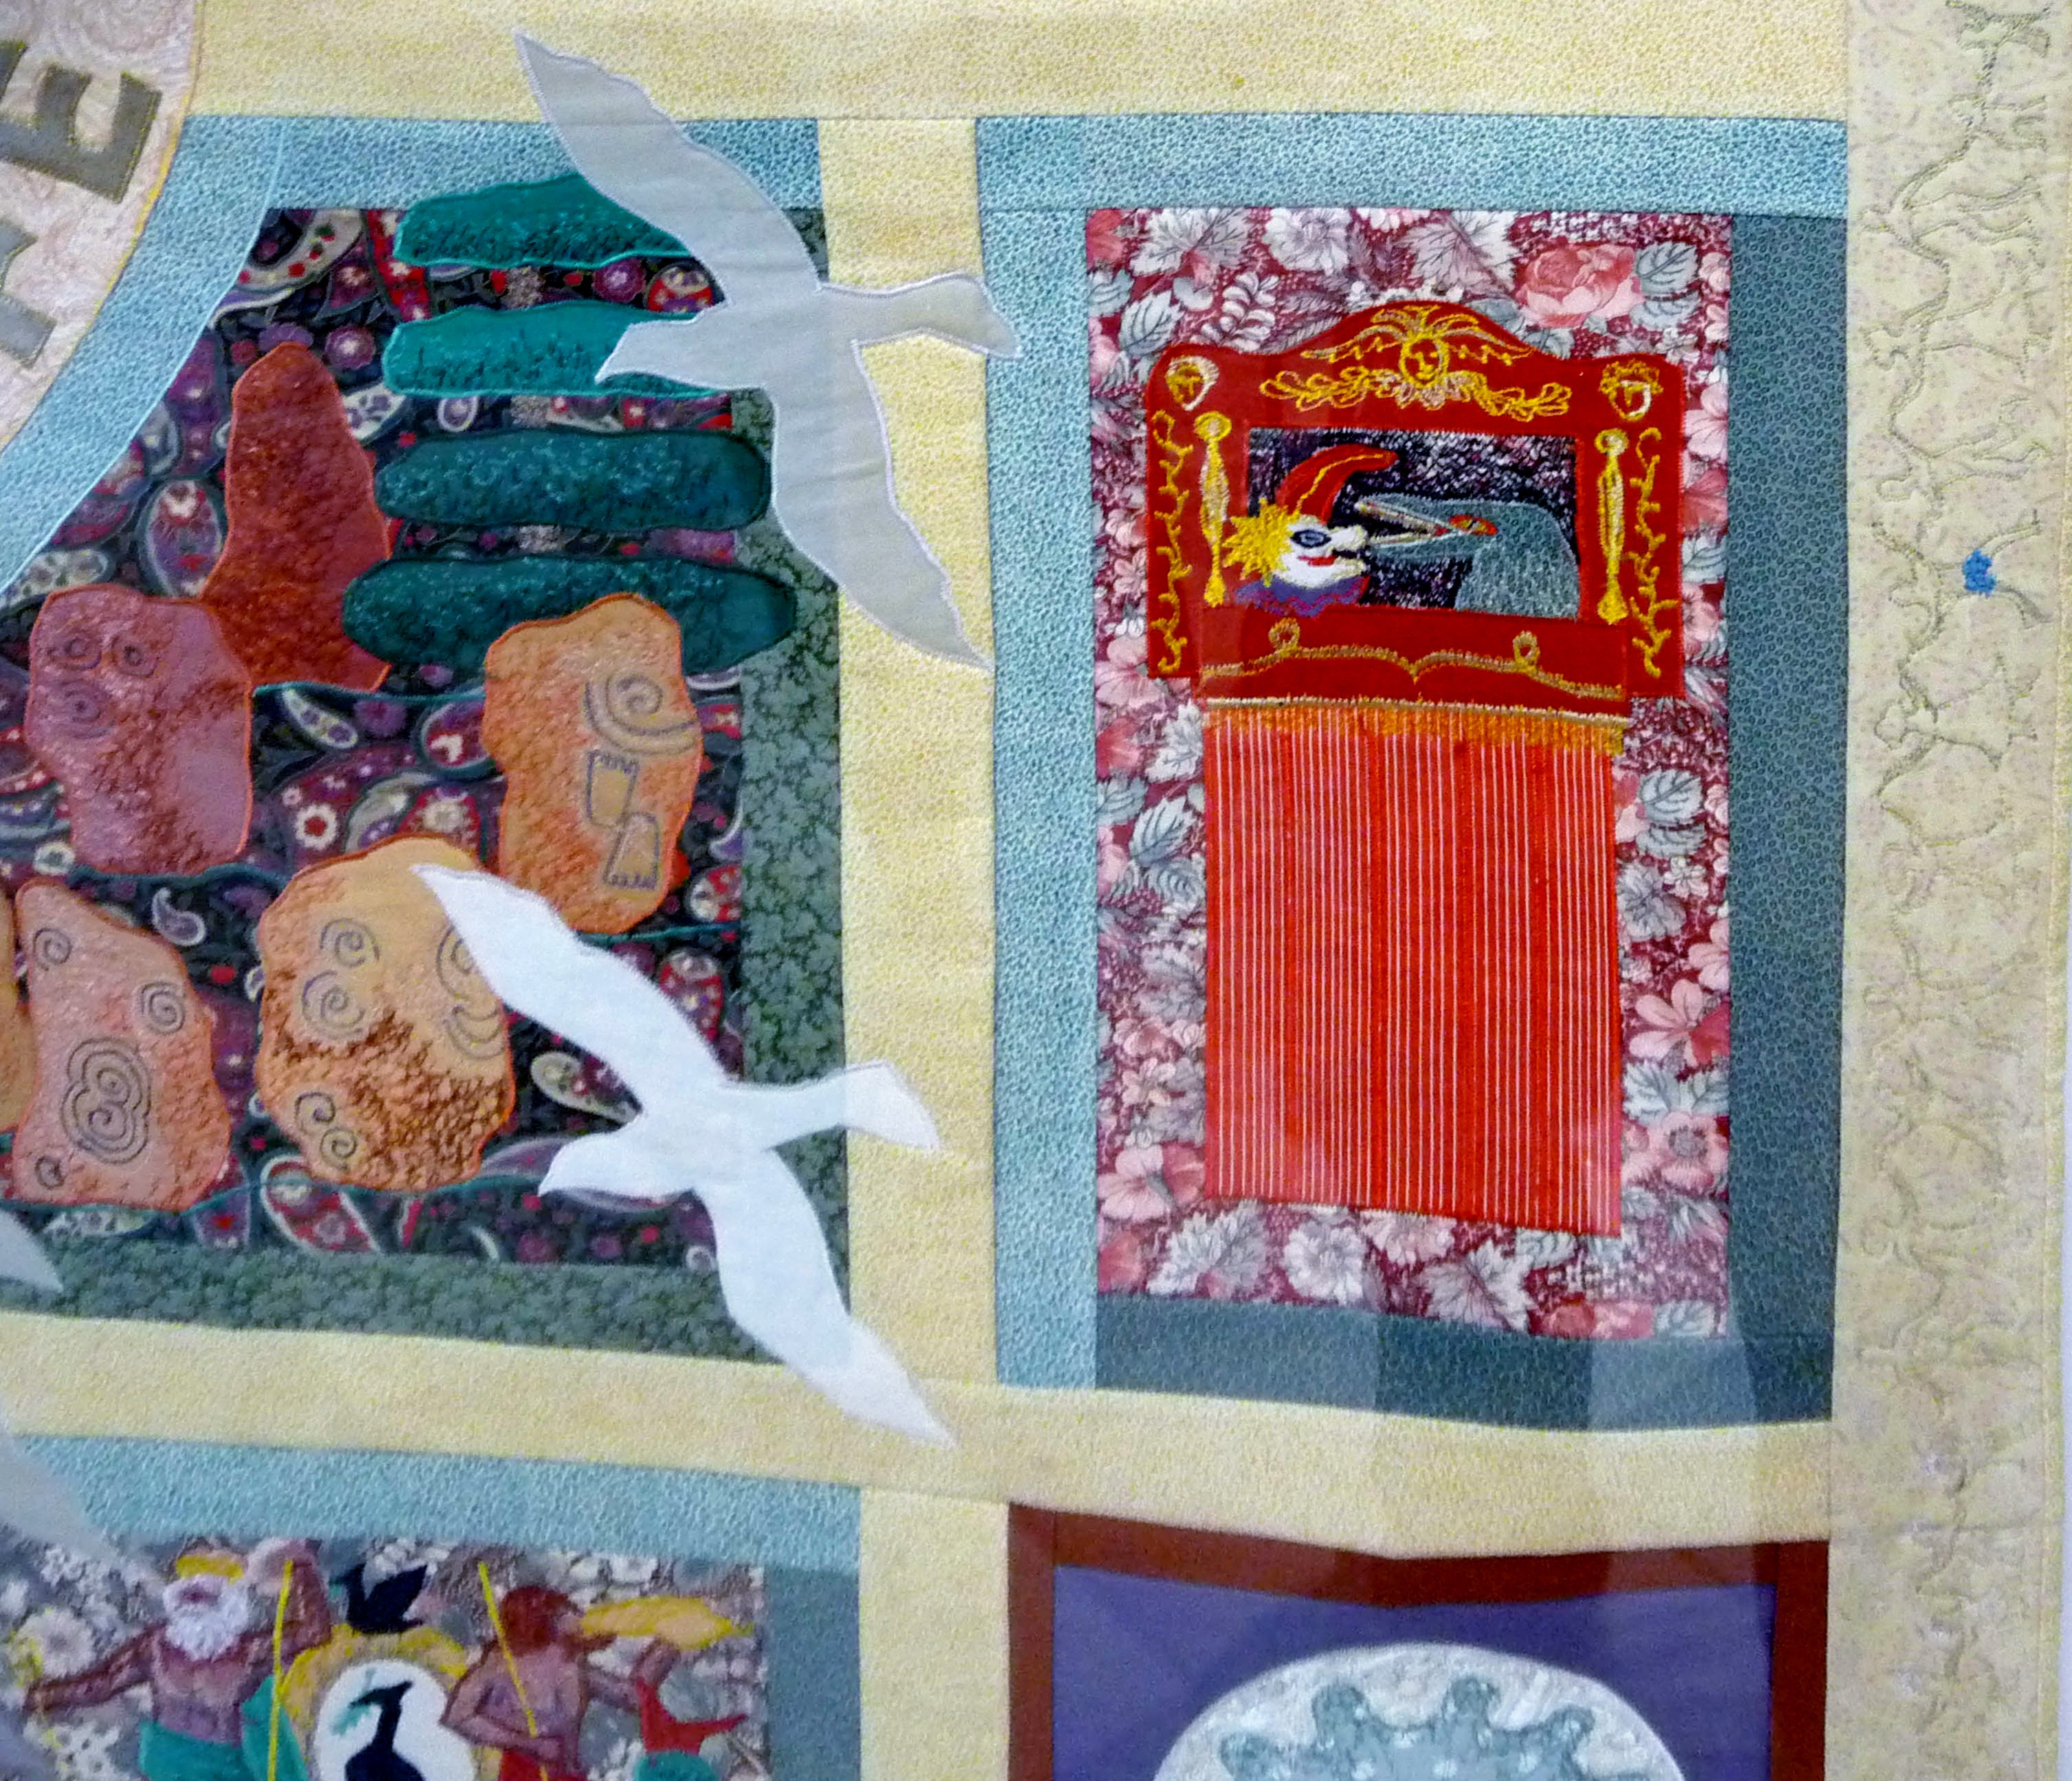 detail of "The Pool of Life Wall Hanging" by Norma Heron, 1995